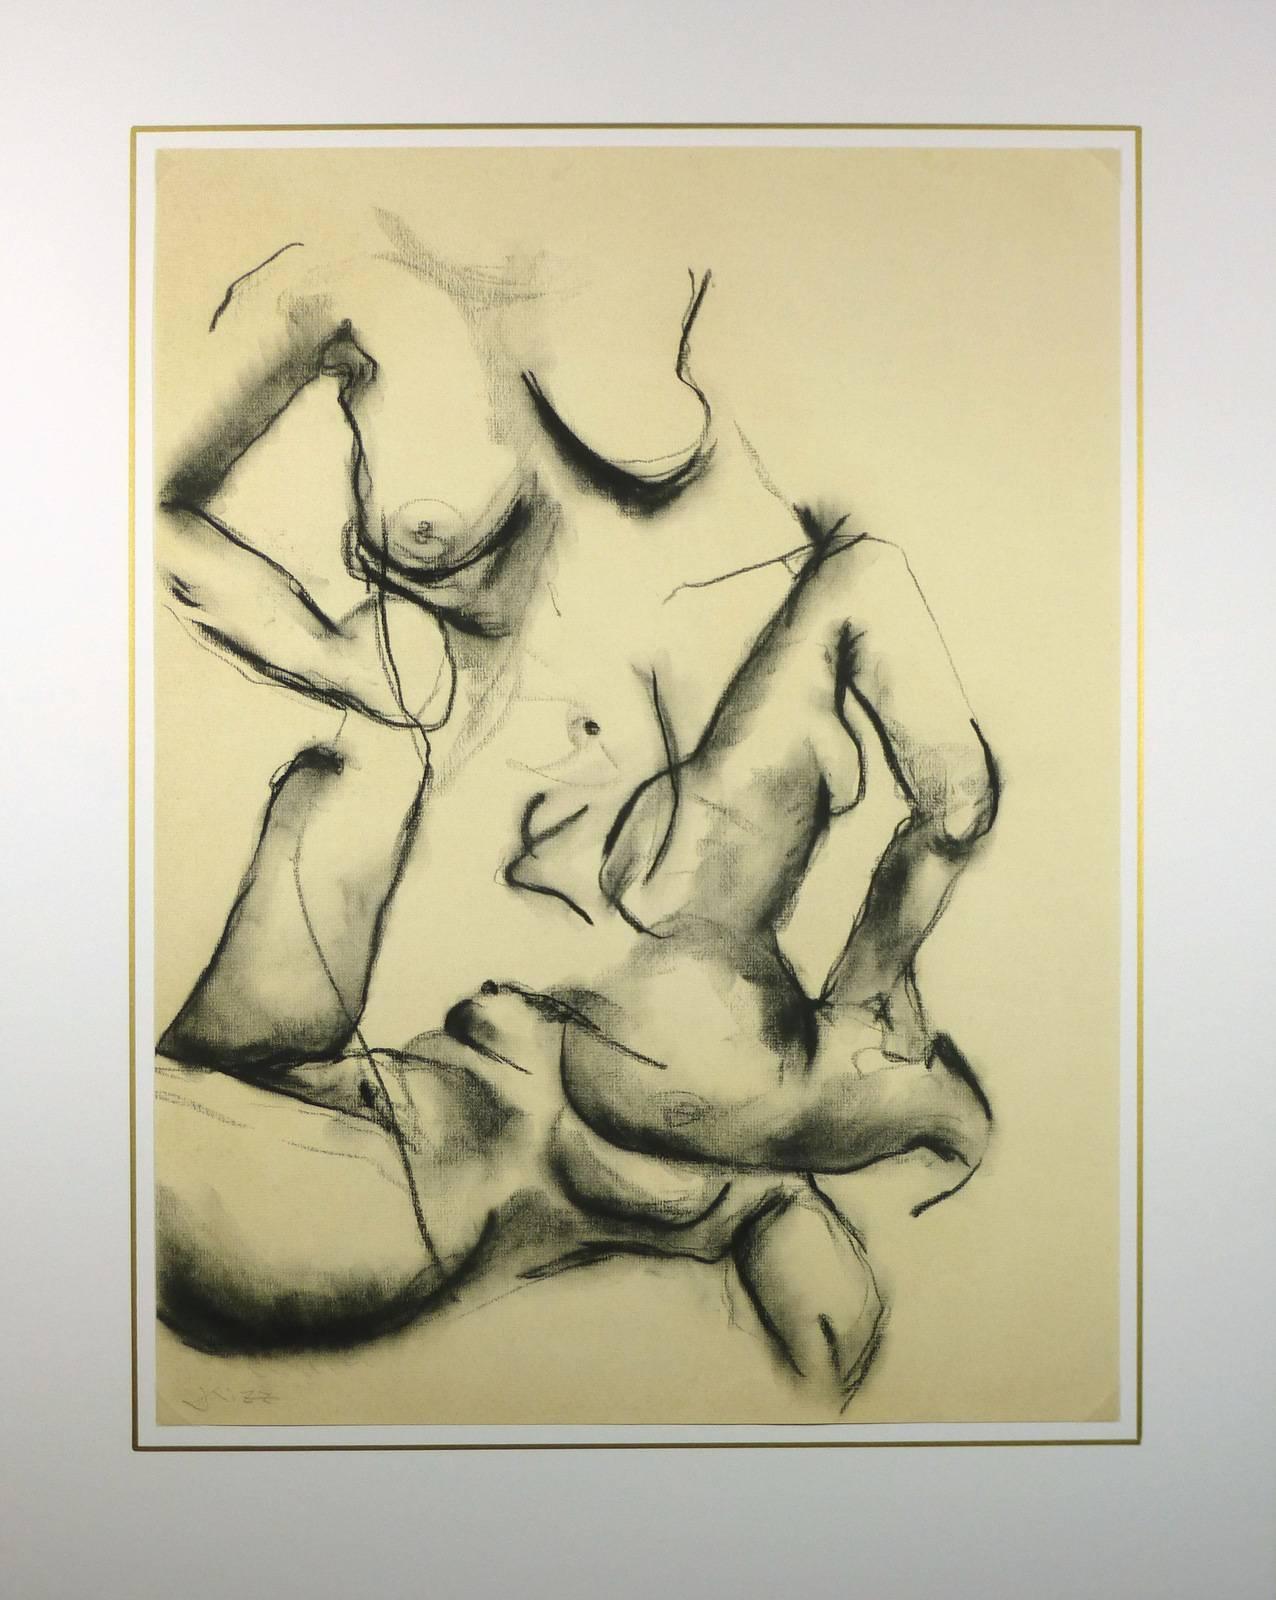 Impactful abstract charcoal drawing of female nudes by American artist Kismine Varner, circa 1990. Signed lower left.  

Original artwork on paper displayed on a white mat with a gold border. Mat fits a standard-size frame.  Archival plastic sleeve